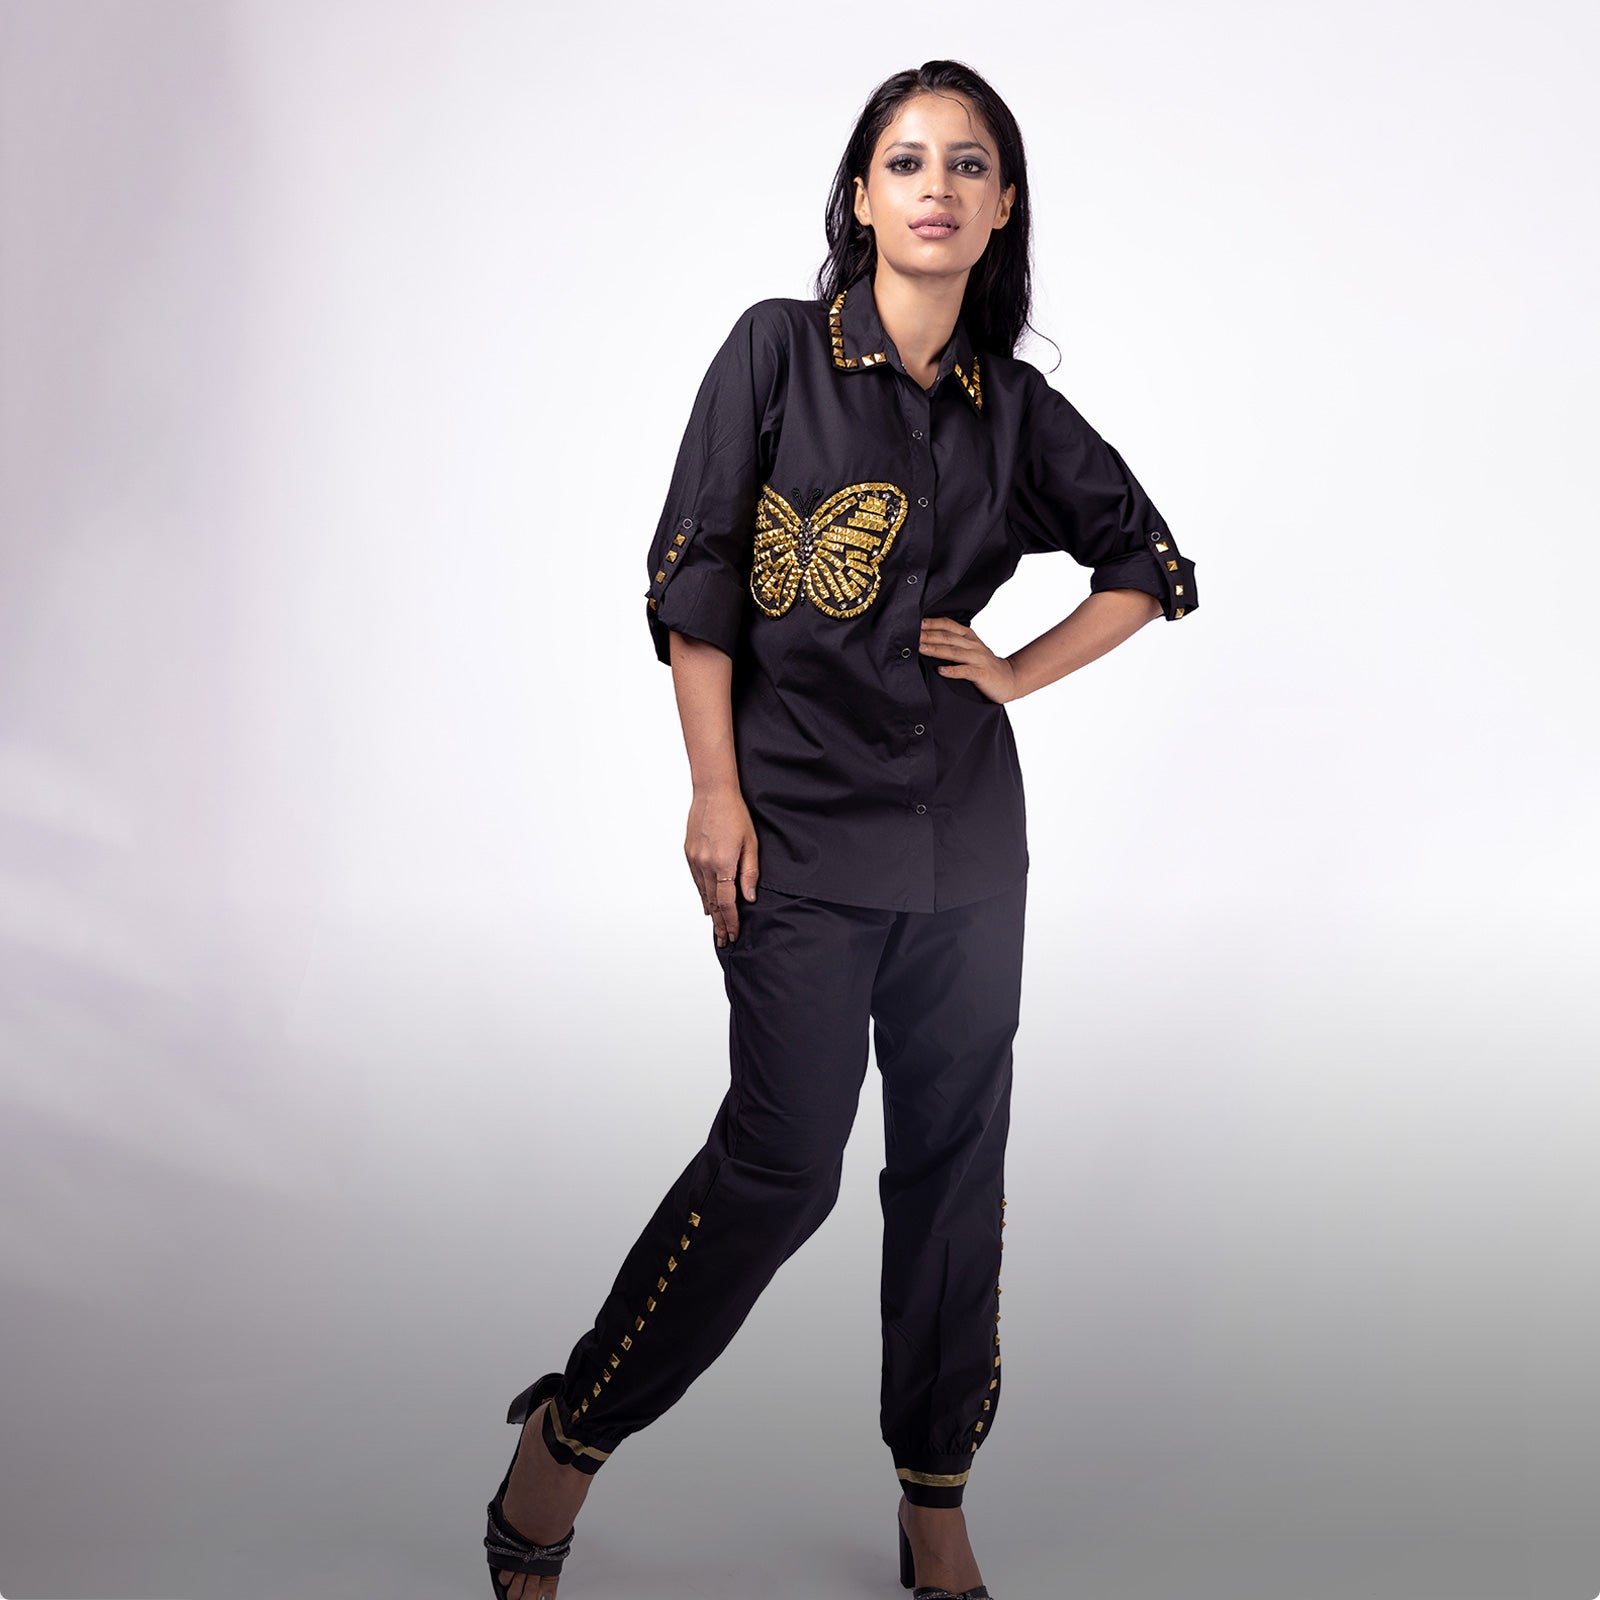 Designer Co ord sets including tunic sets with pants